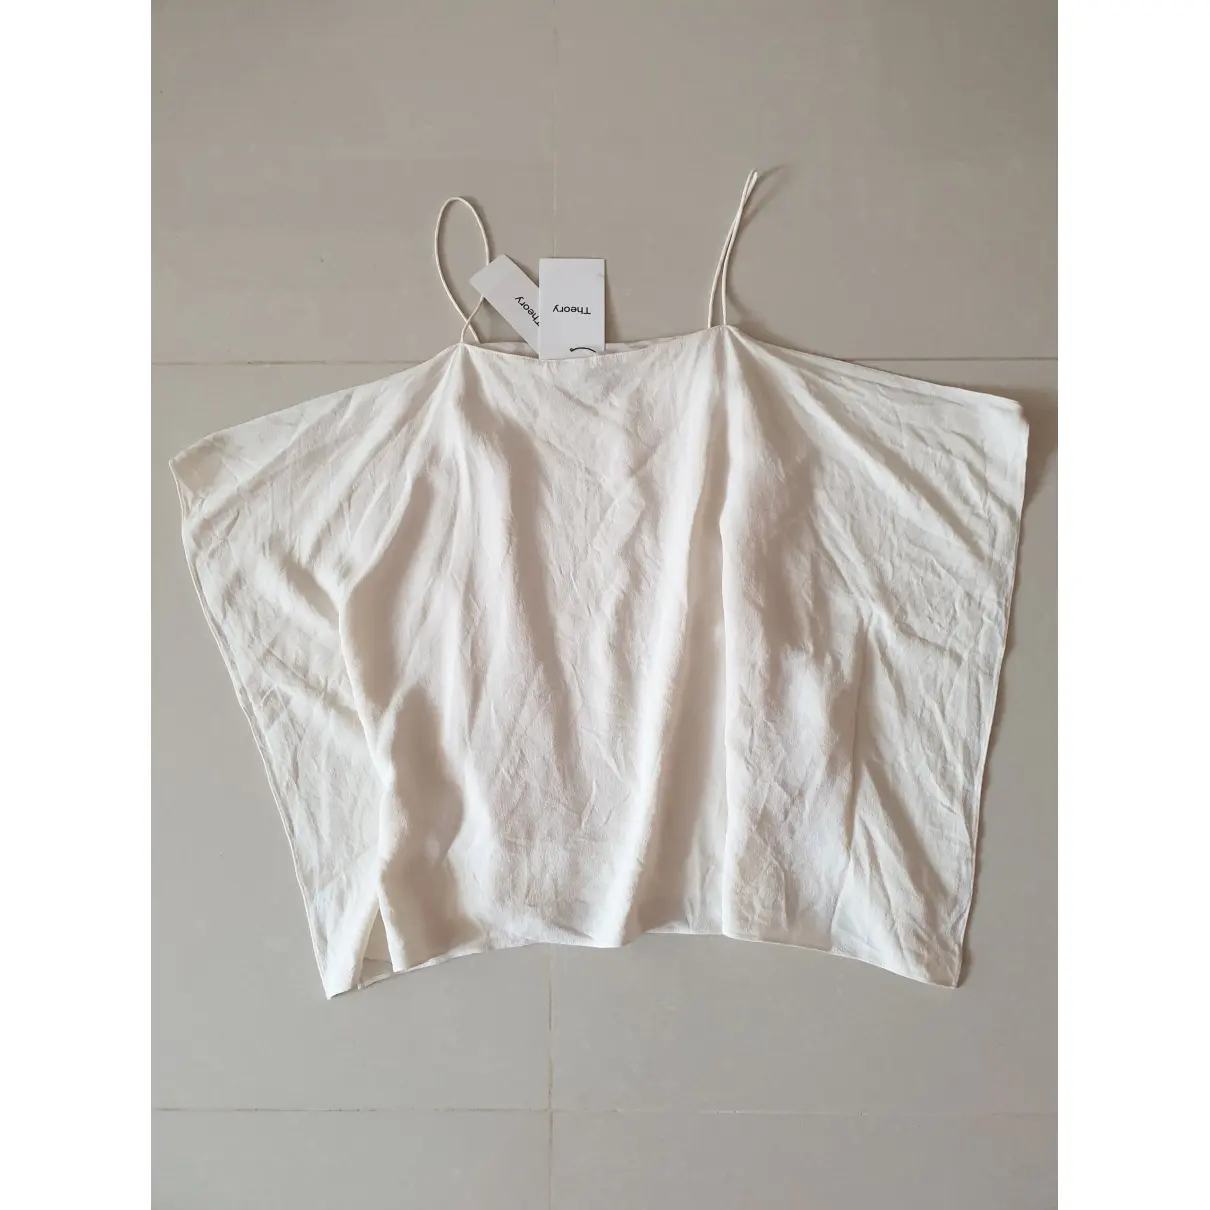 Buy Theory Top online